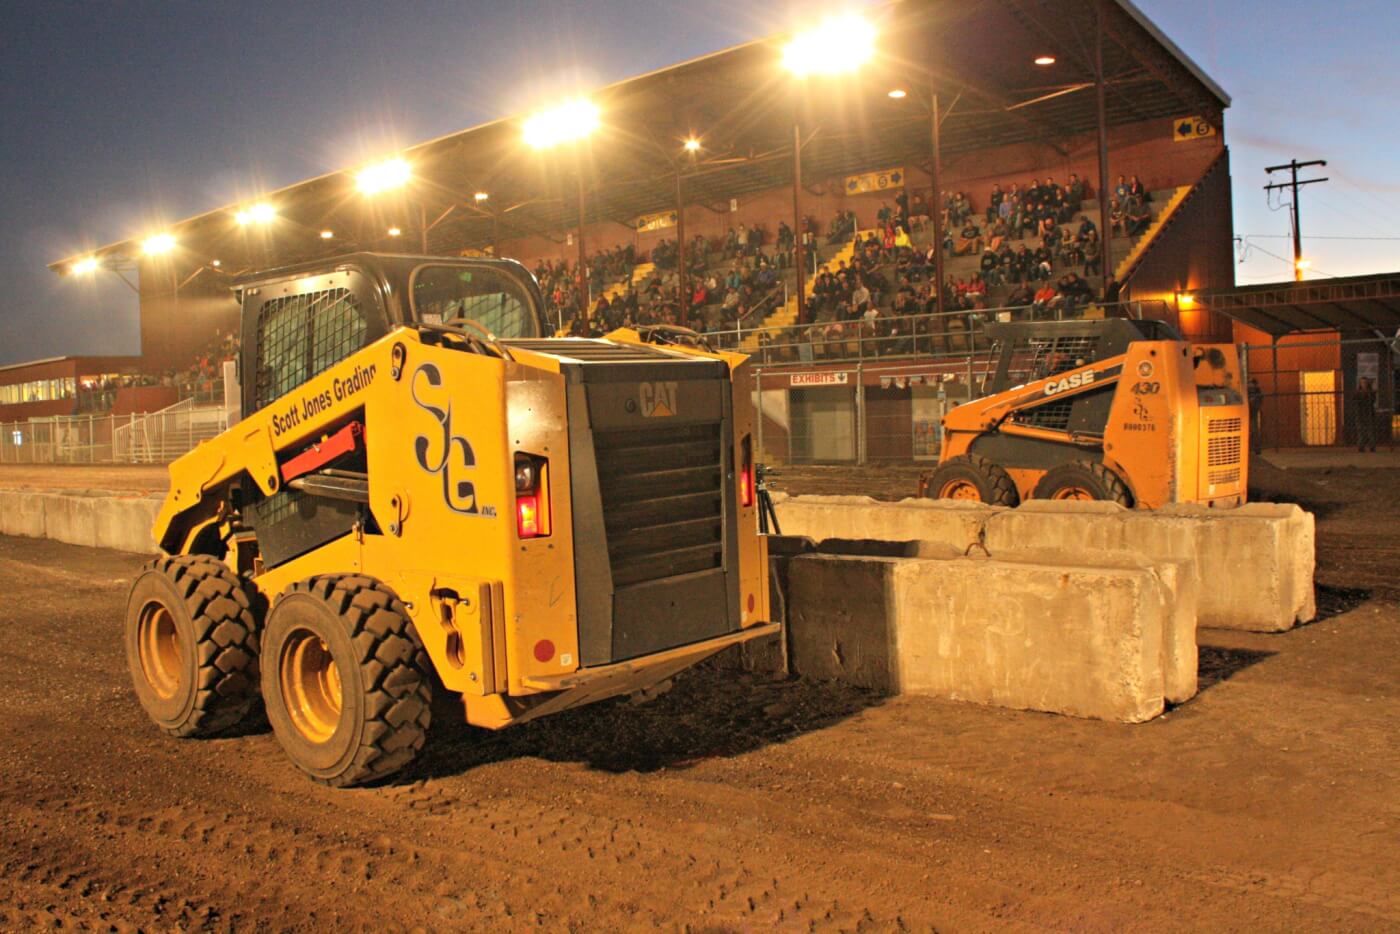 What would dirt drags be without a little skid/steer side-by-side action? With the front buckets off it was more of a wheelie fest than a drag race, but it definitely got the crowd’s attention and was one of the best parts of the show.